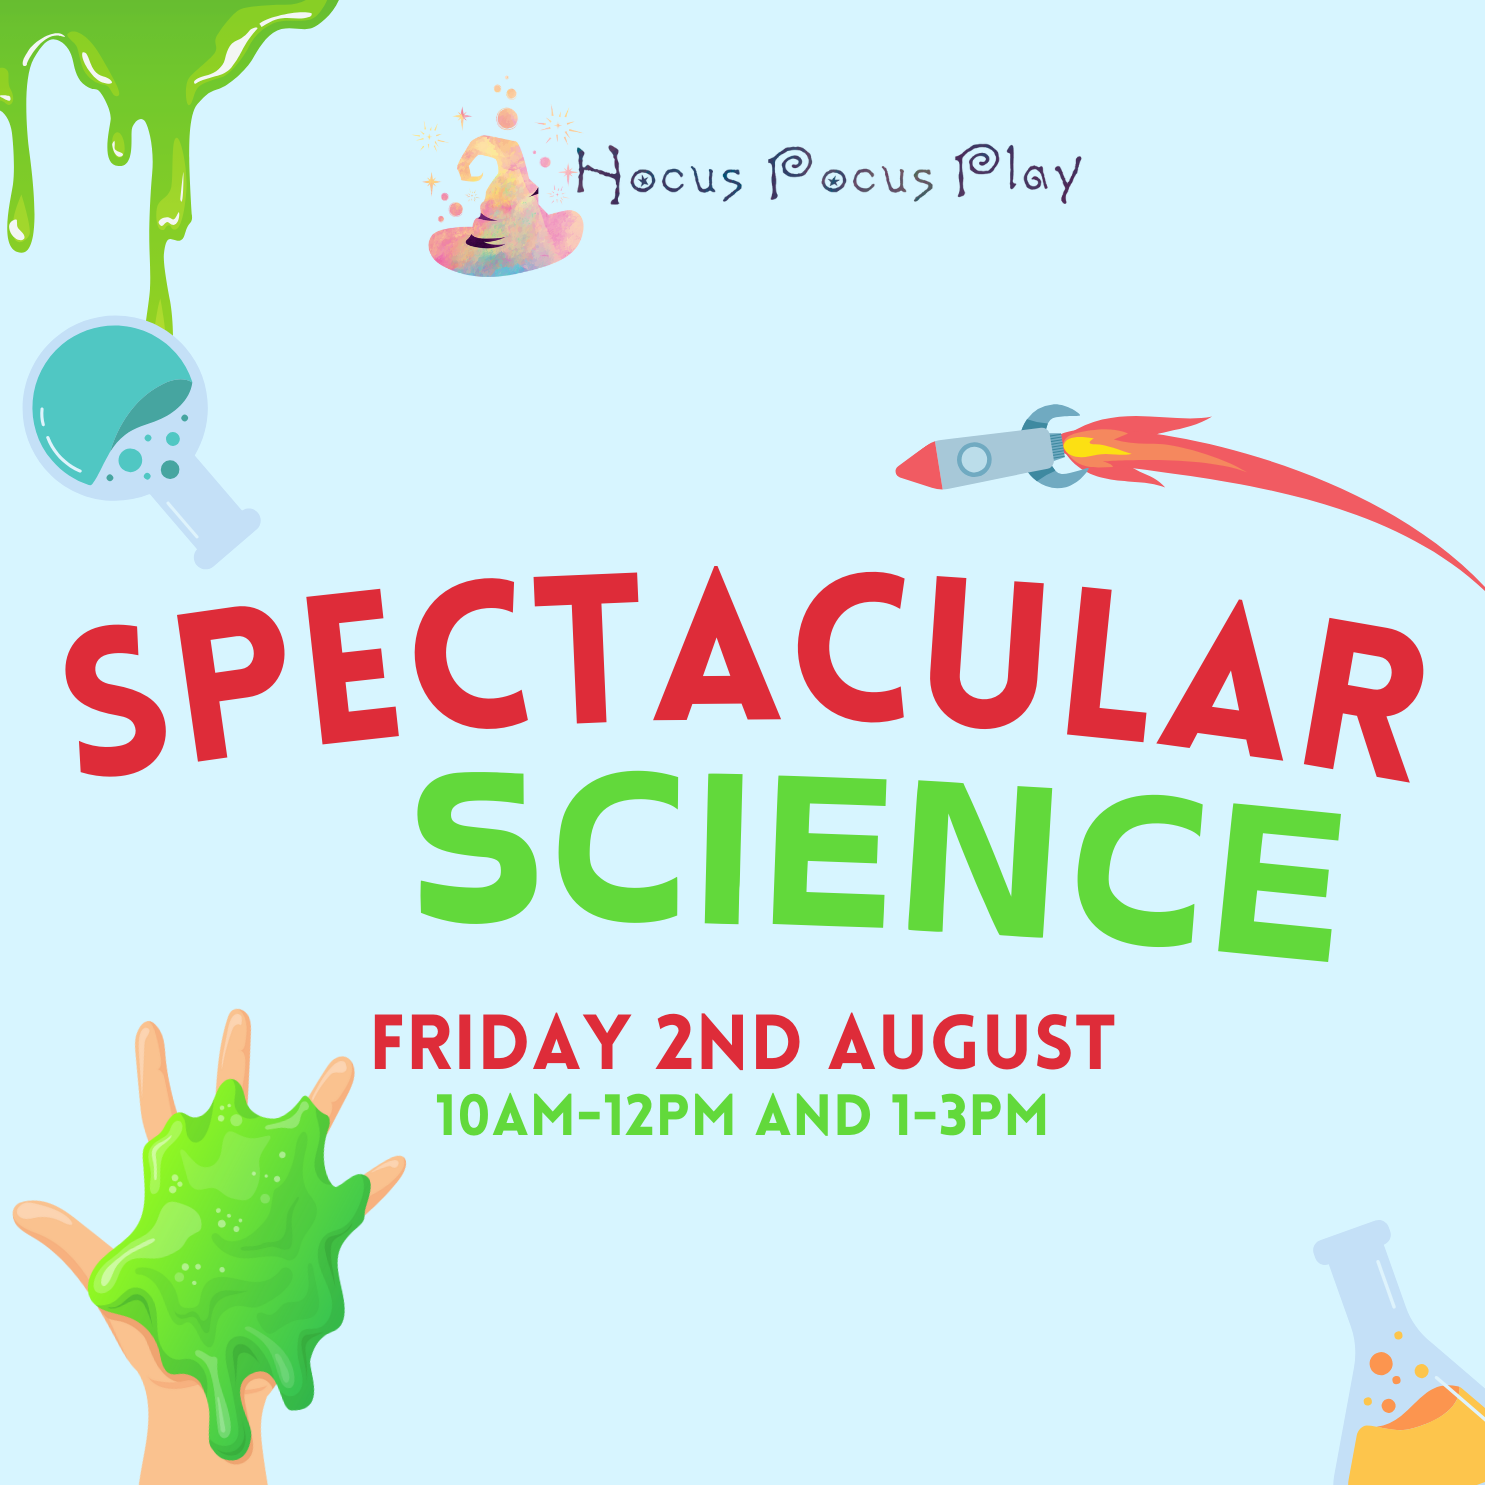 Spectacular Science Friday 2nd August 10am-12pm and 1pm-3pm